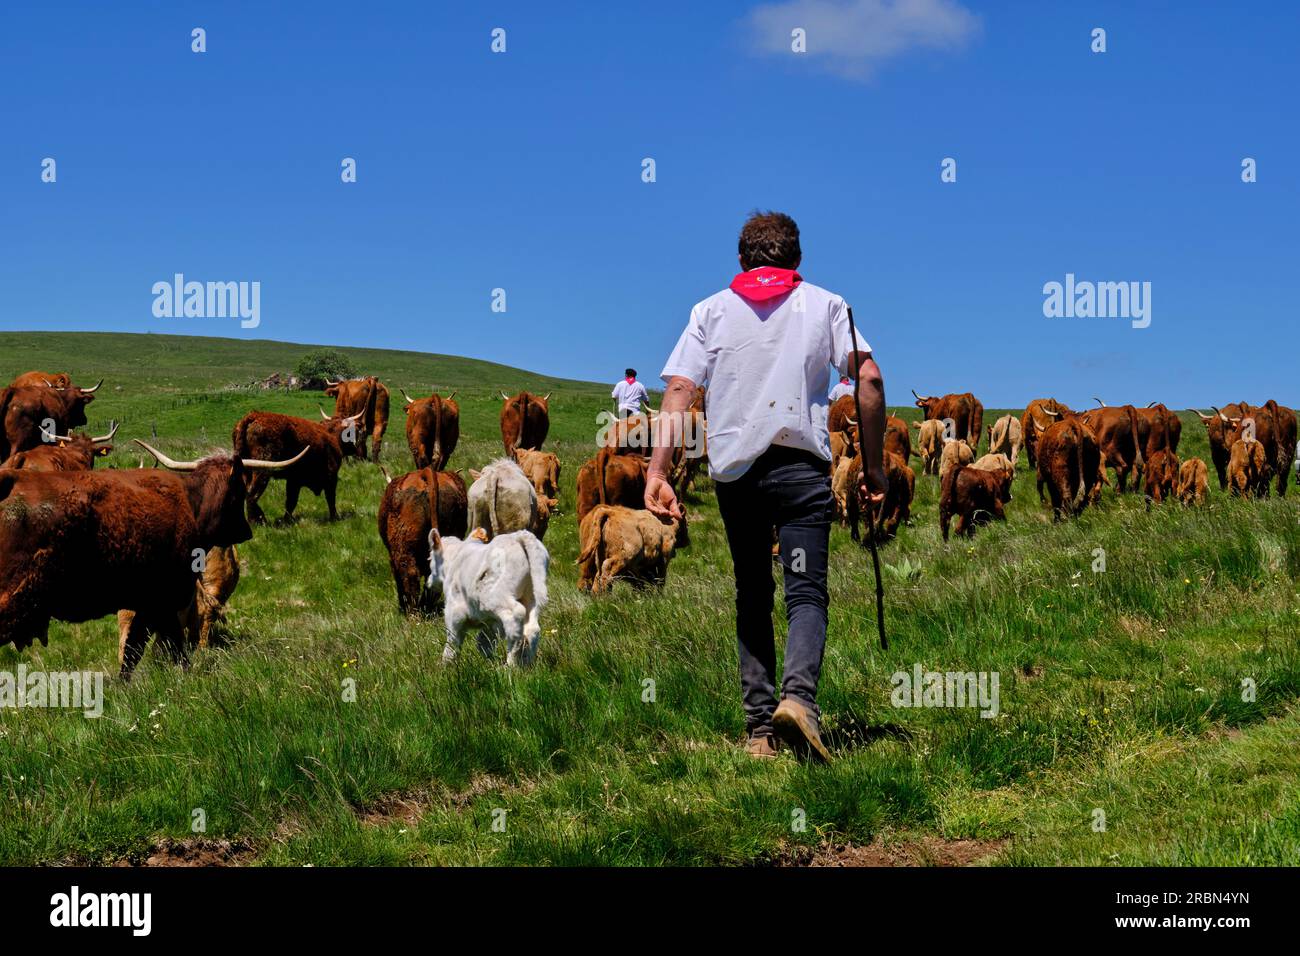 France, Cantal, Allanche, Regional Natural Park of the Volcanoes of Auvergne, Cézallier plateau, Estive festival, transhumance of the herd of Jérôme F Stock Photo